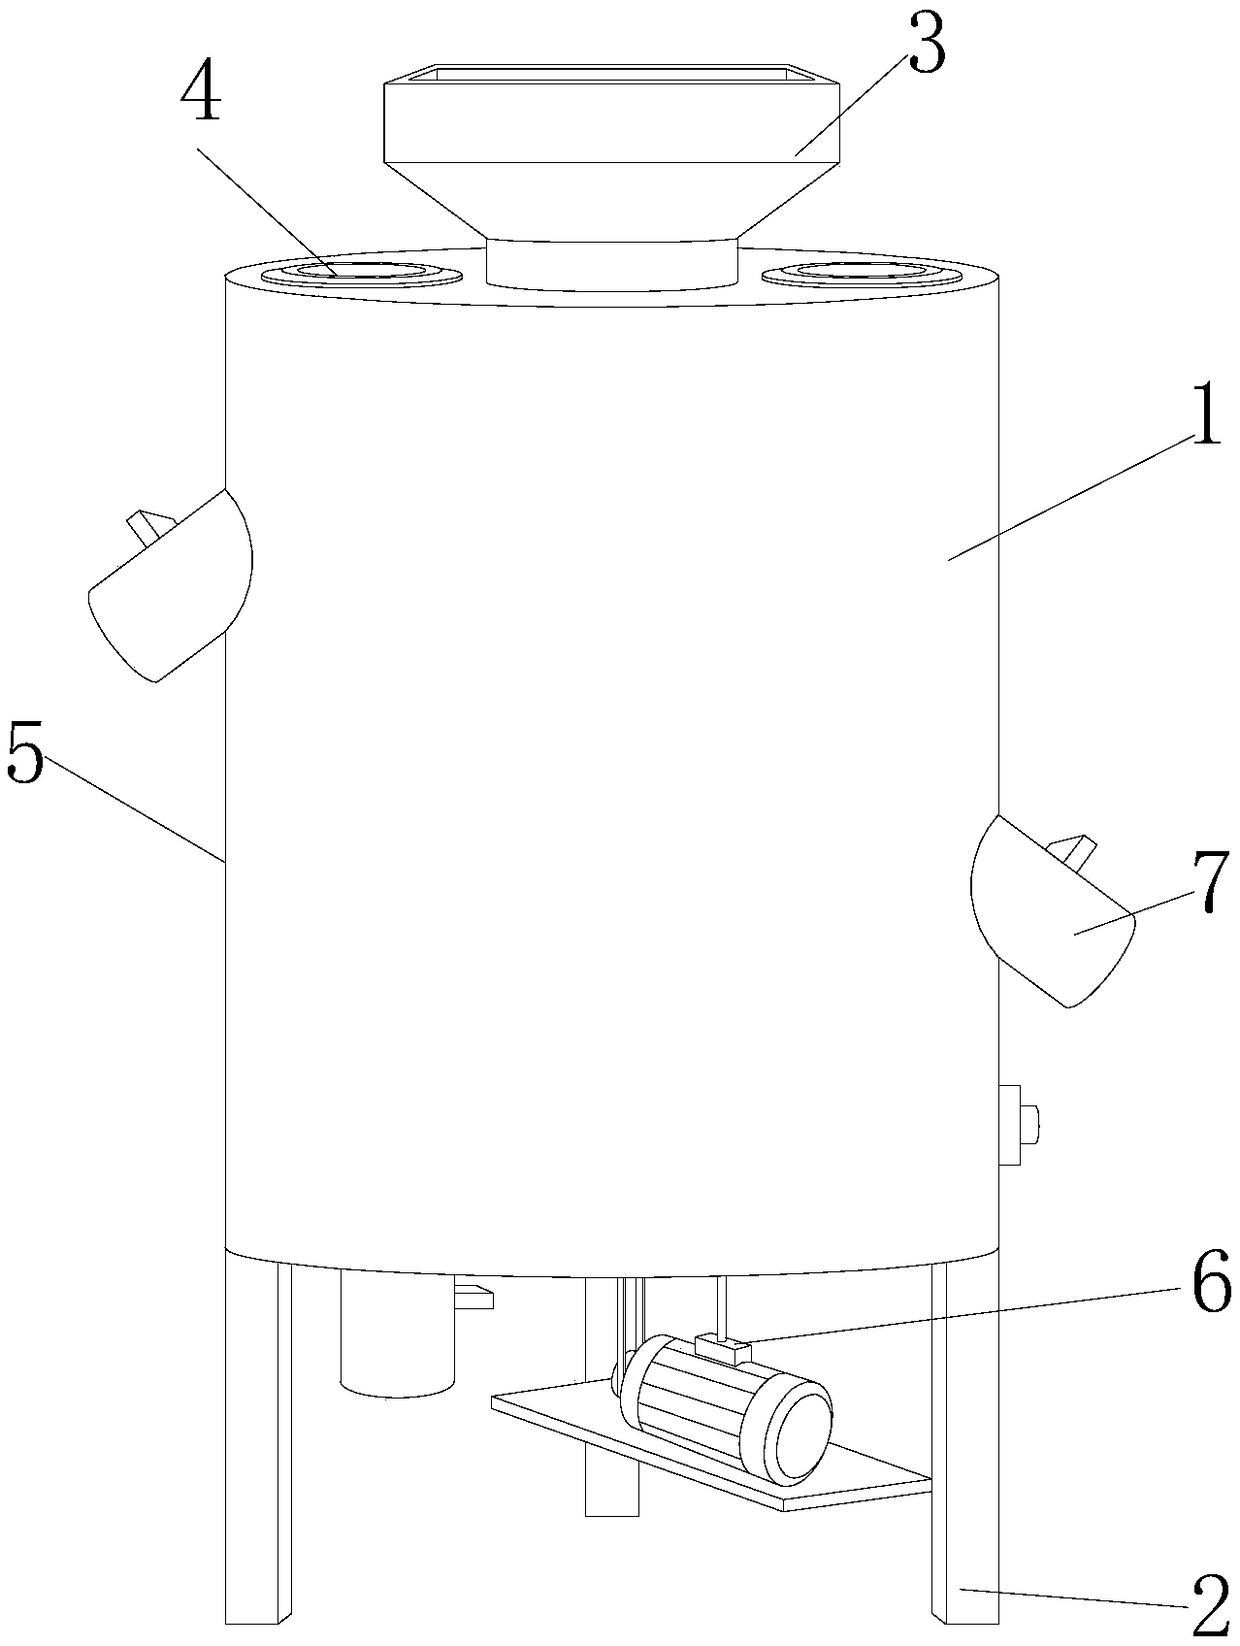 Tea leaf processing device utilizing centrifugal force for screening and discharging